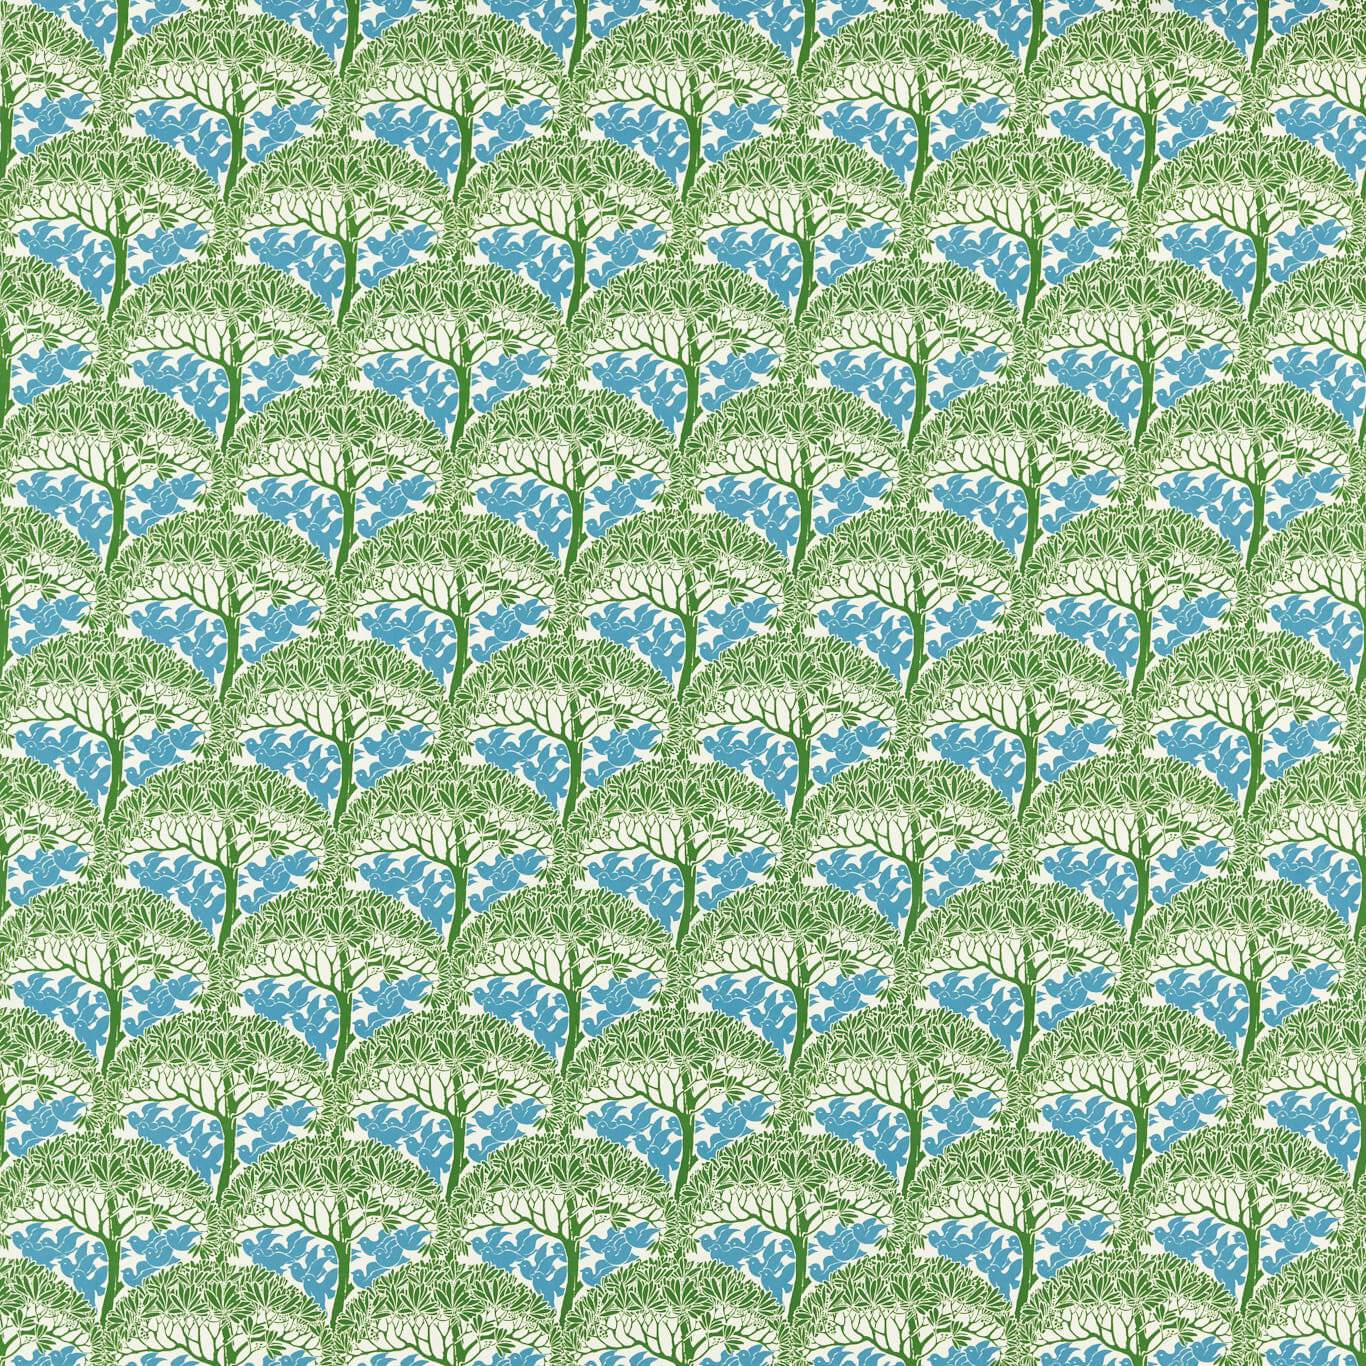 The Savaric Garden Green Fabric By Morris & Co